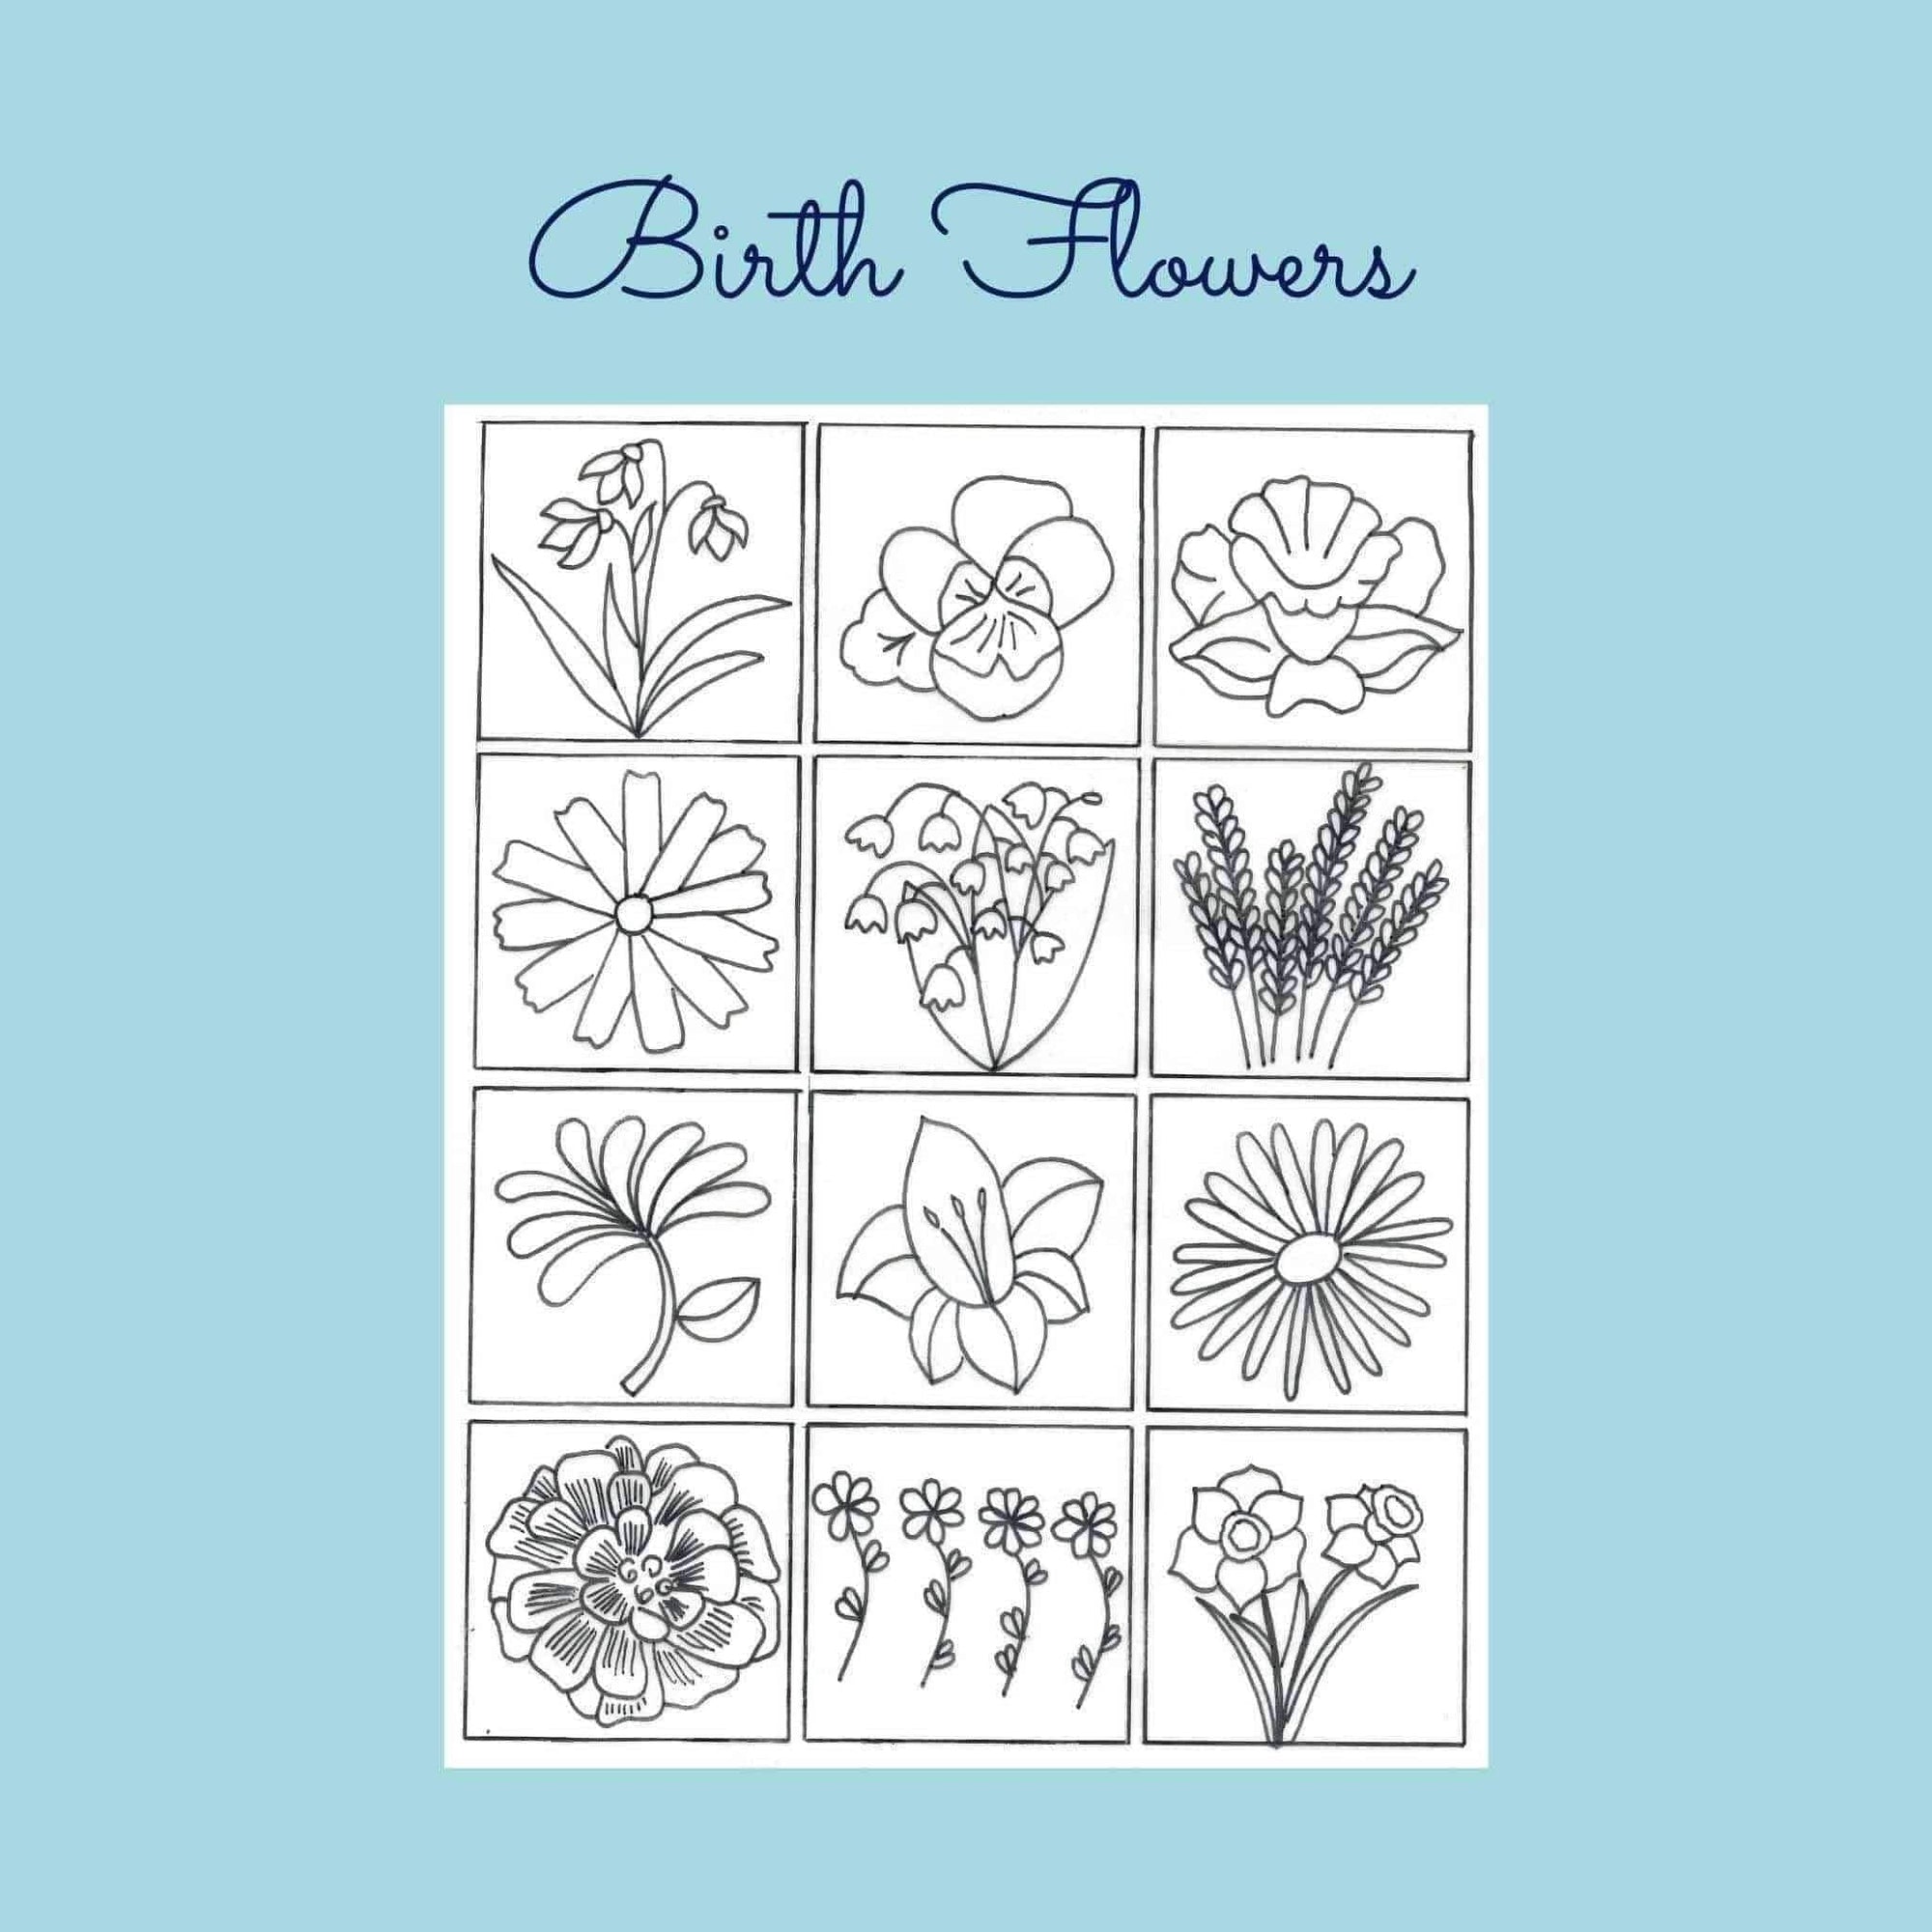 26 styles Funny Embroidery Kit for Beginners, Stamped Cross Stitch Kits for Beginners  Adults Patterned Needlepoint Embroidery Hoops Cloth Color Thread Floss  Flowers Plants Cactus